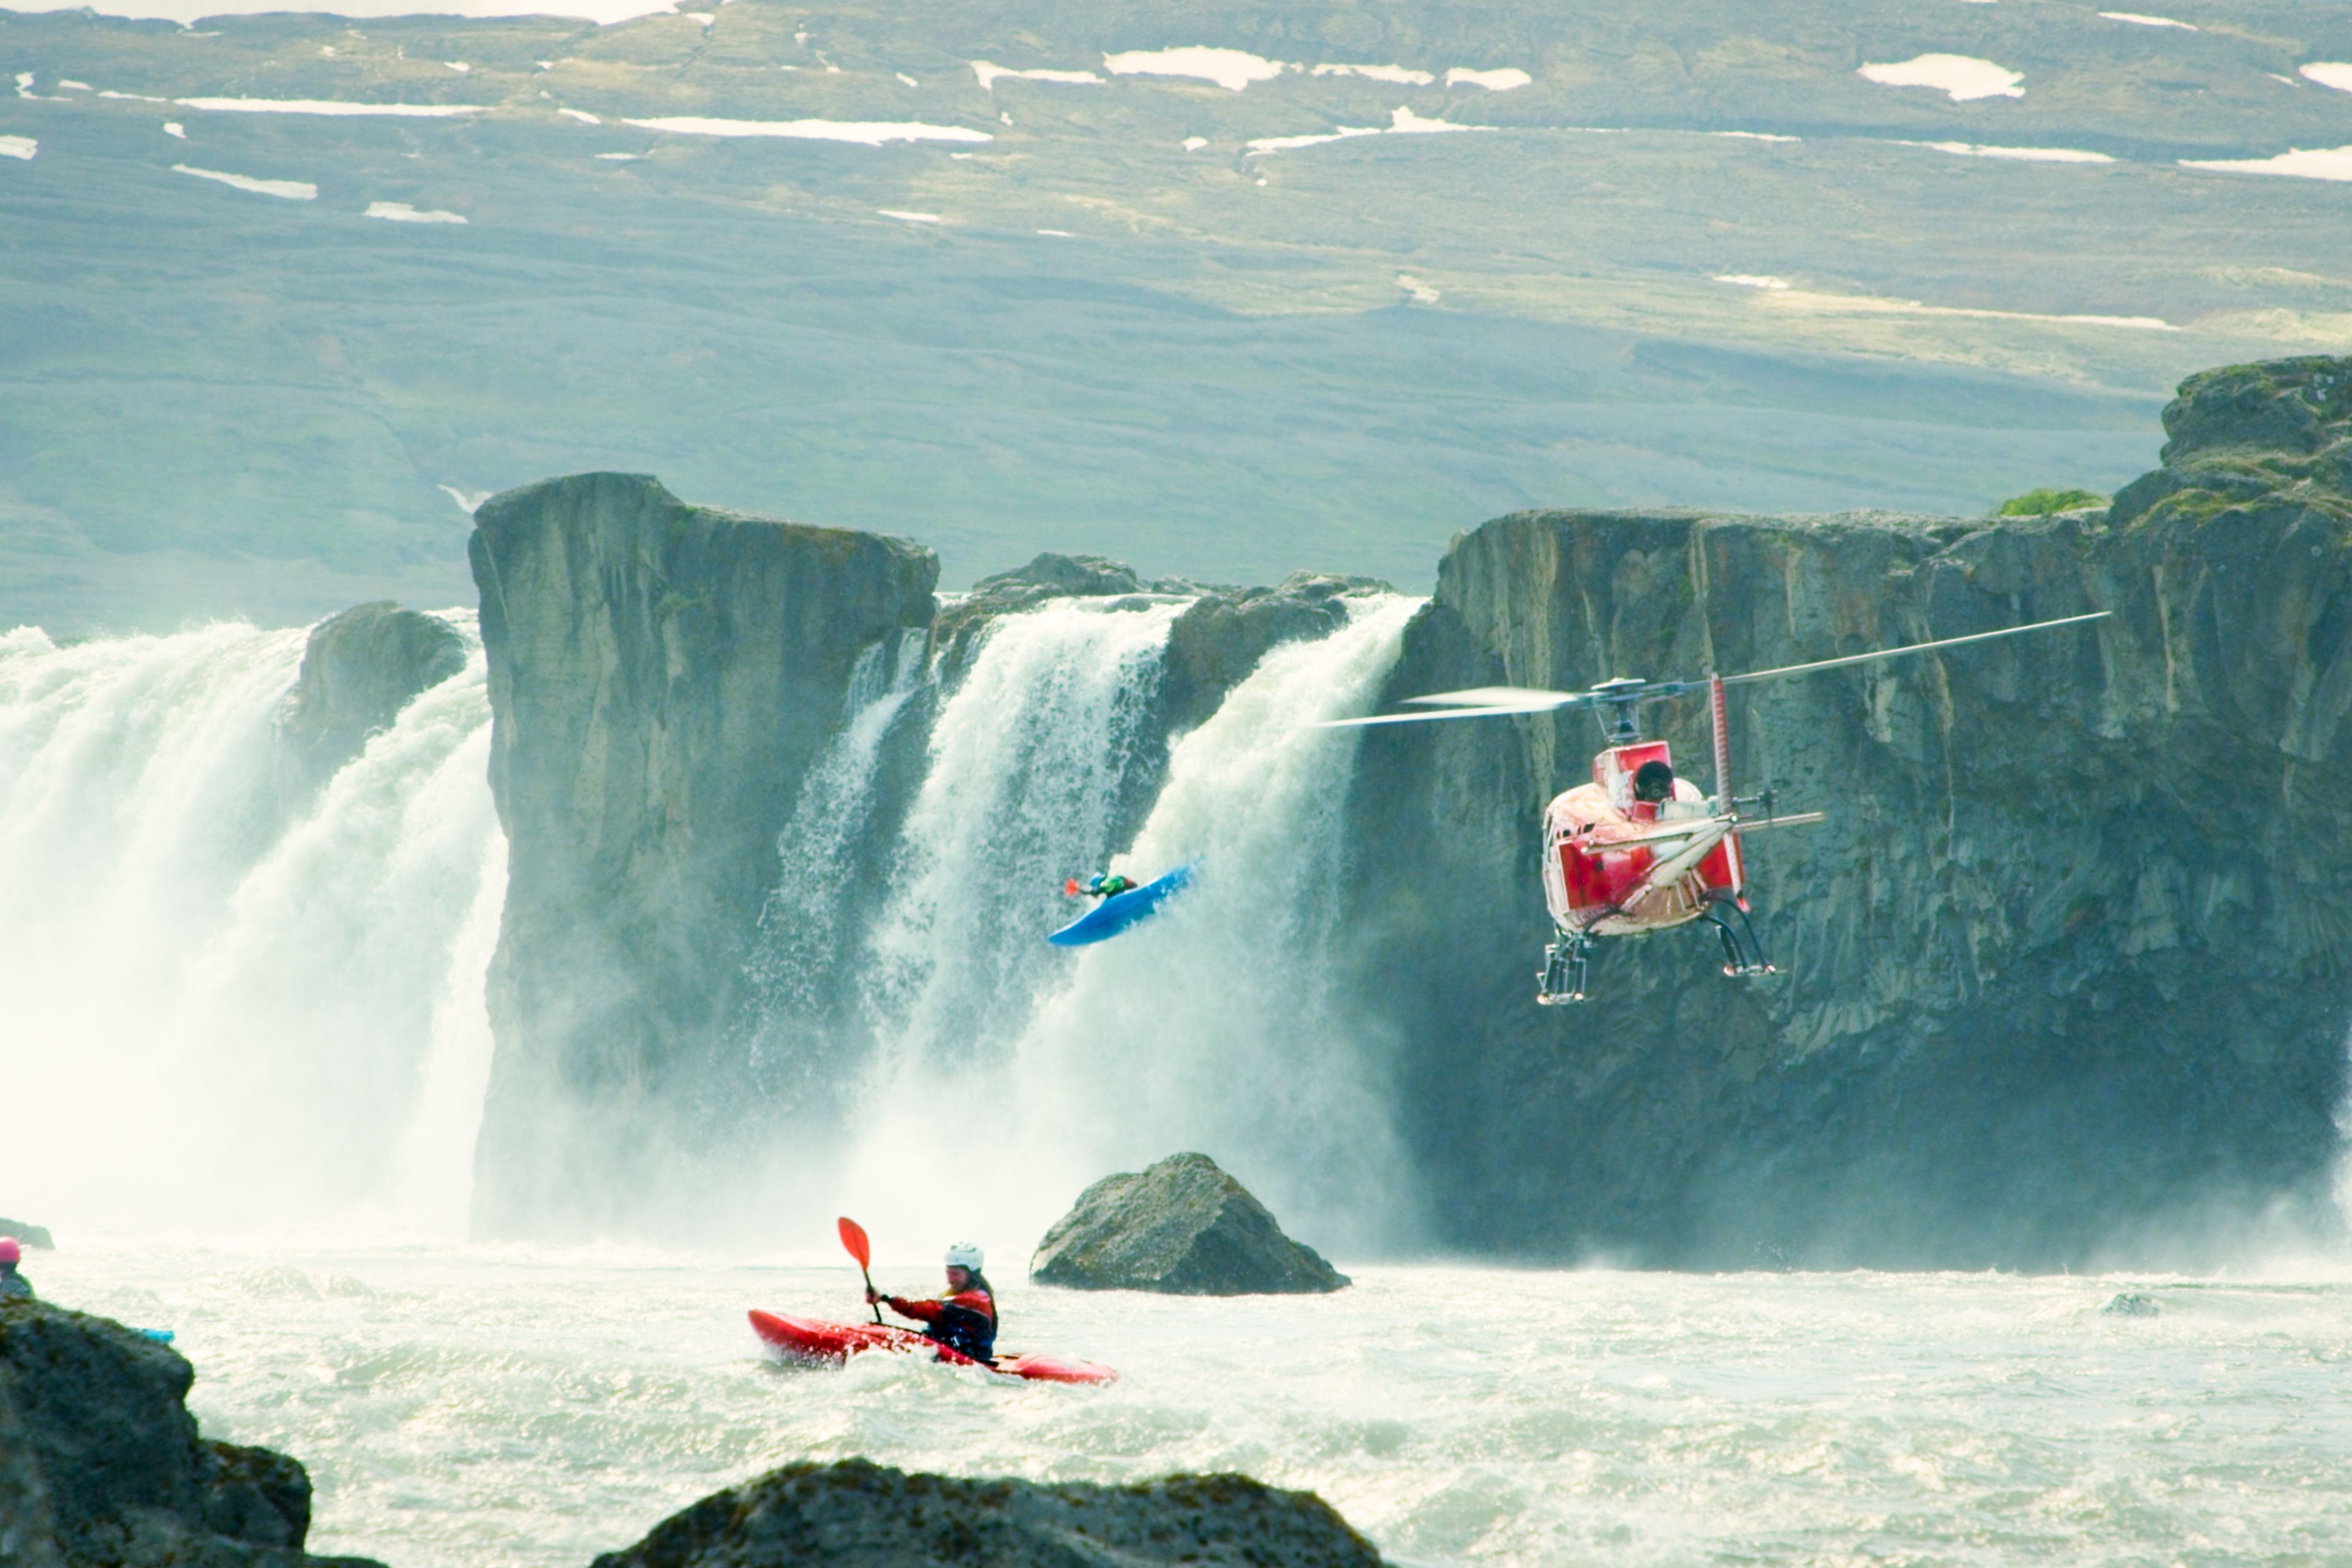 Kayaking scene with helicopter during a flyover iceland movie making